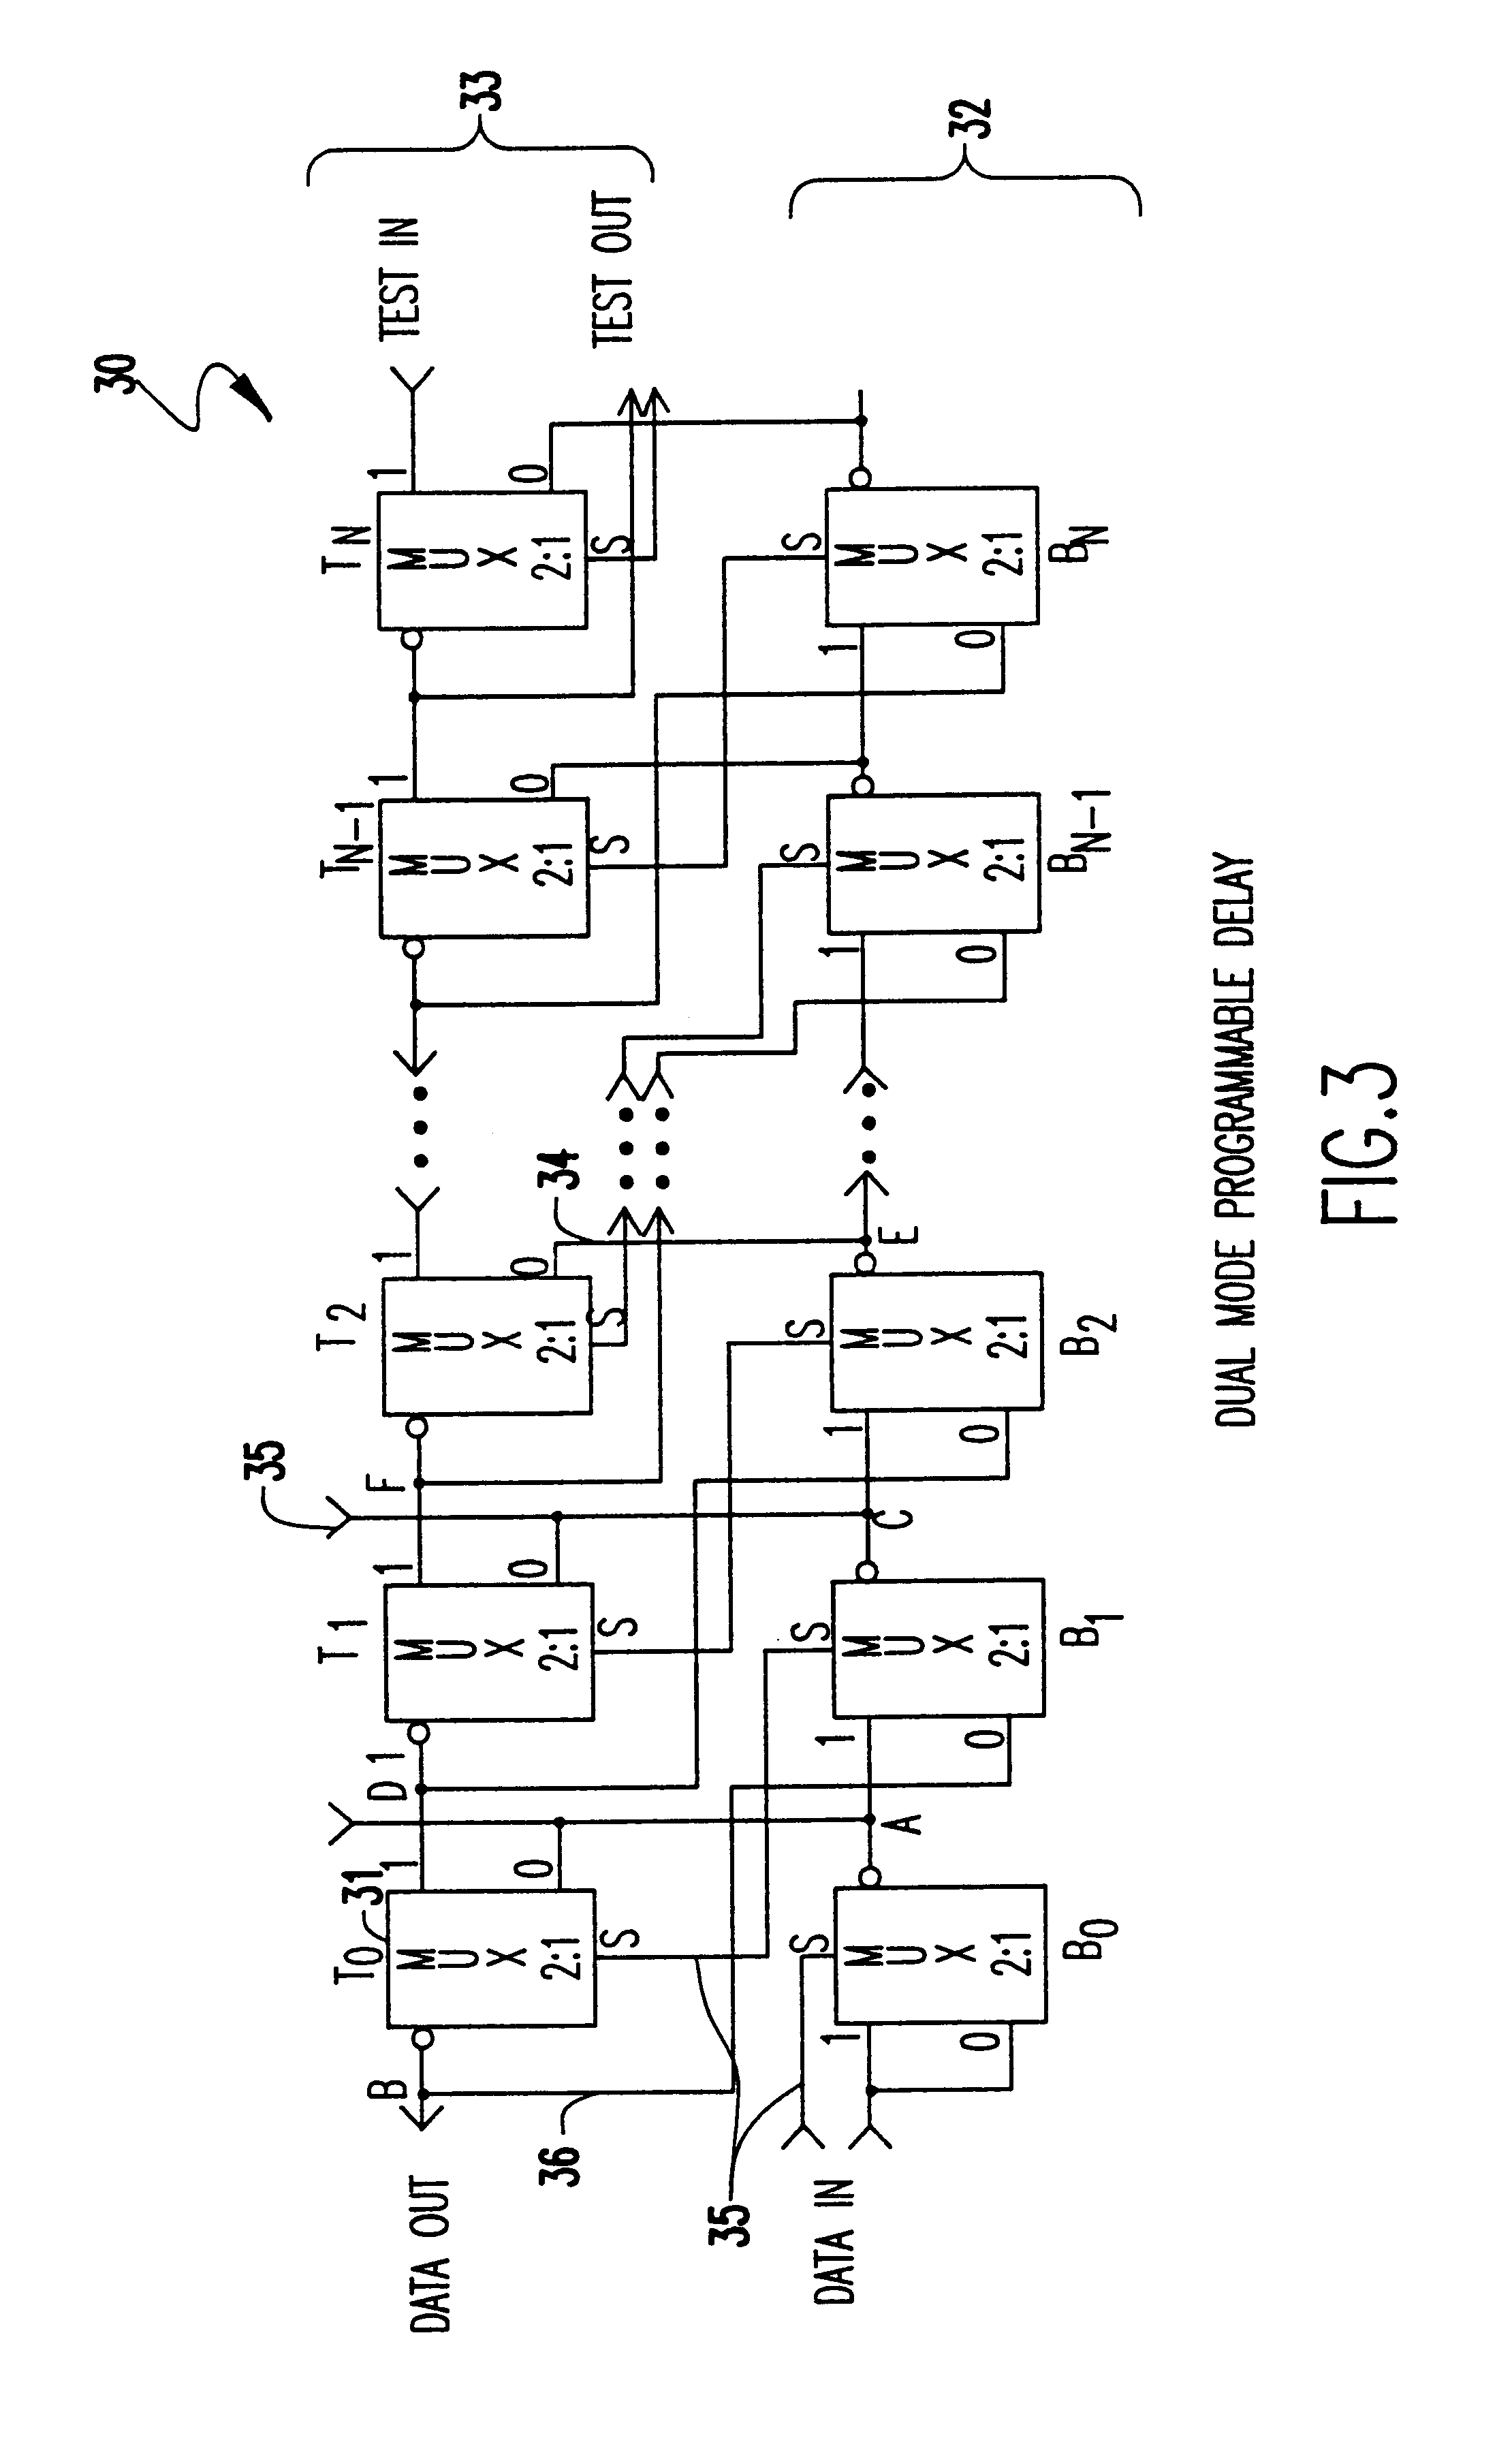 Dual mode programmable delay element